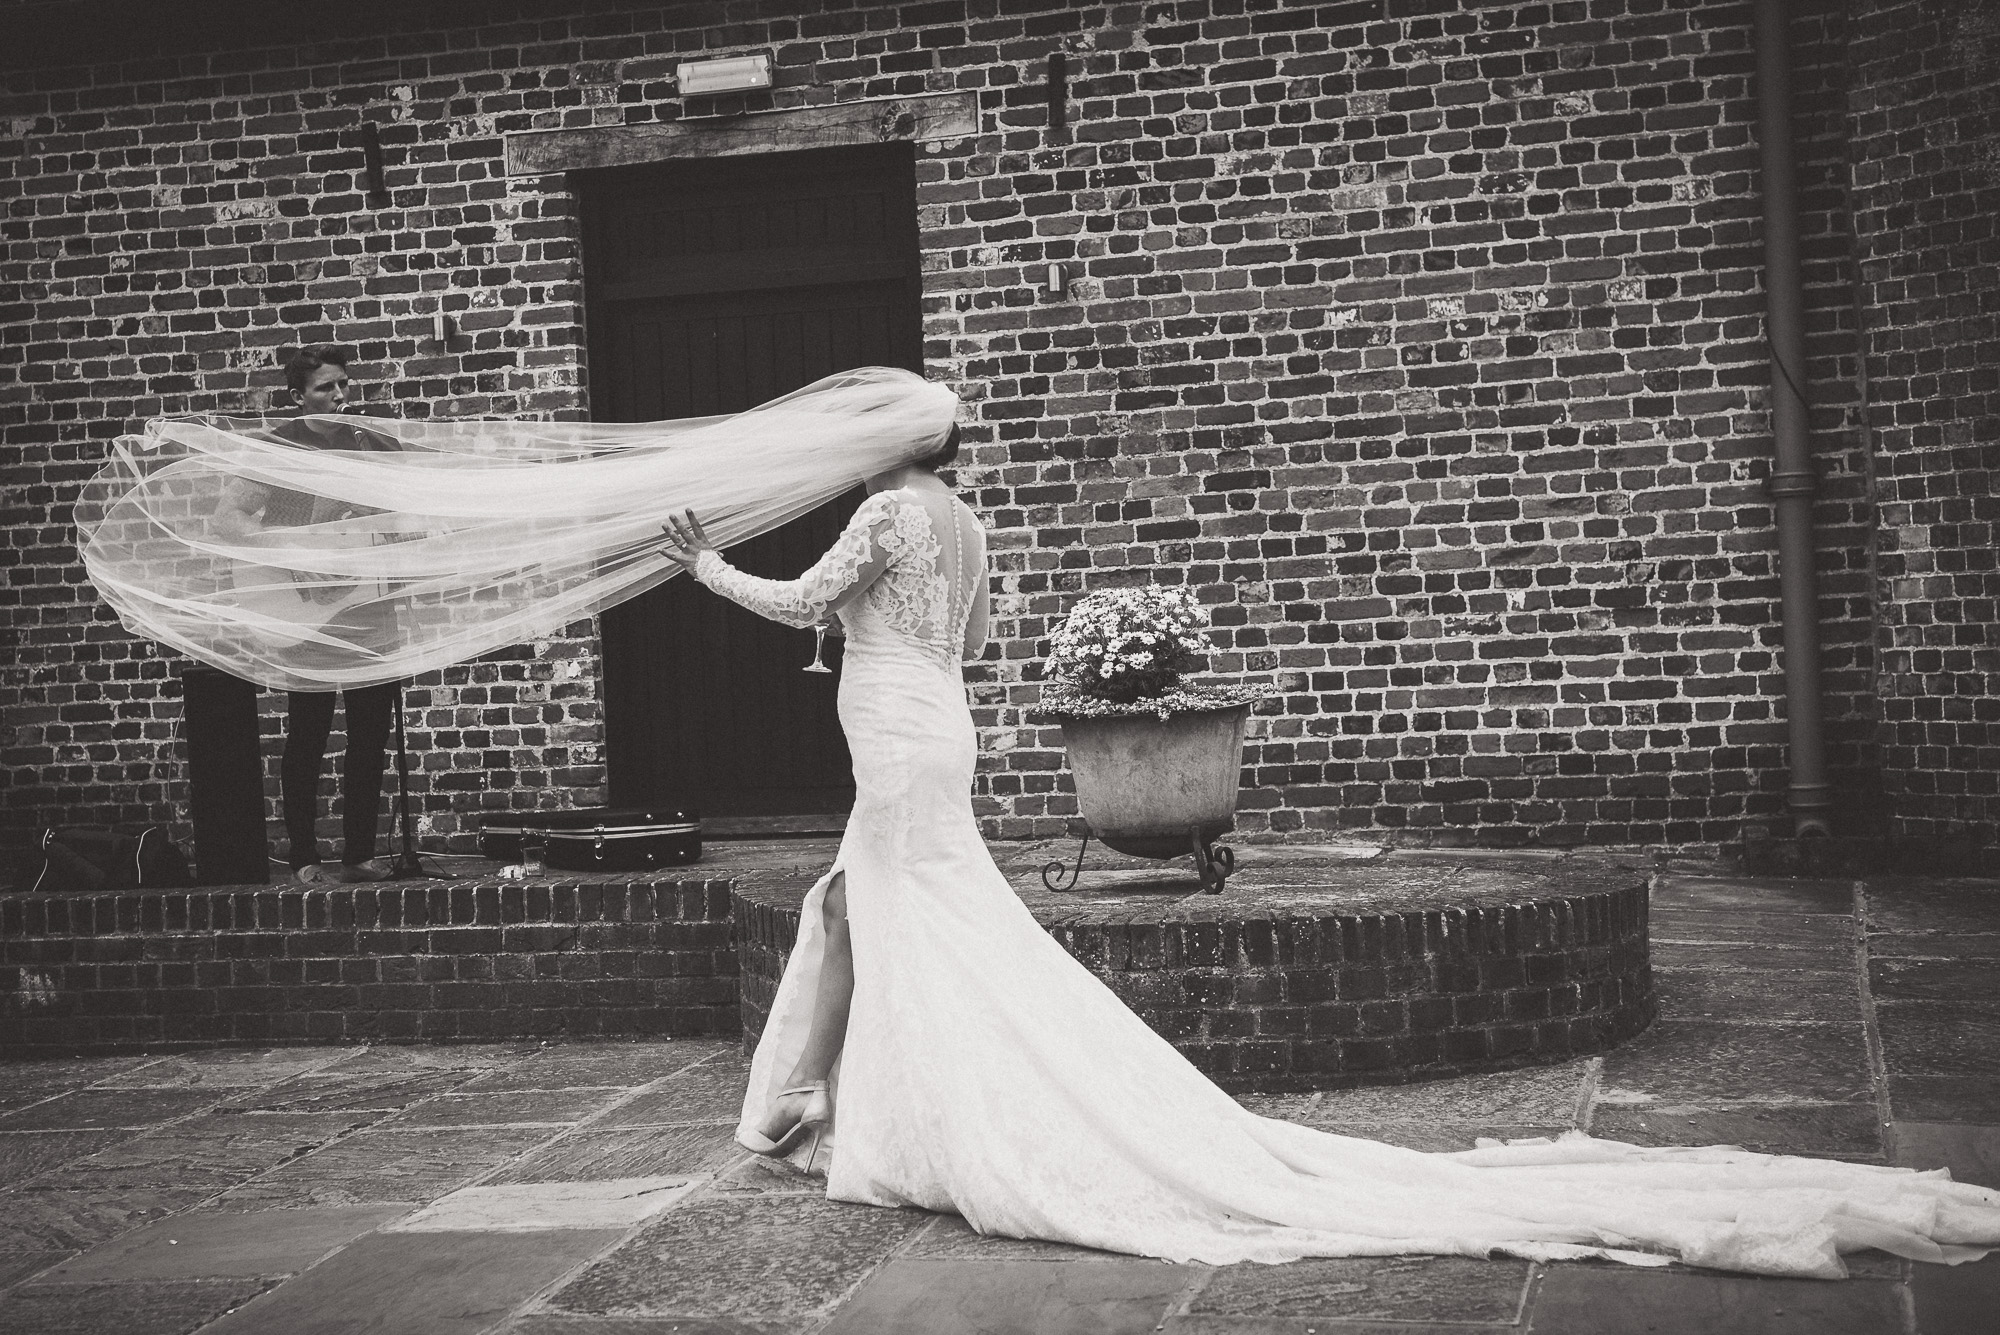 A bride poses for her wedding photo, blowing her veil in front of a brick building.